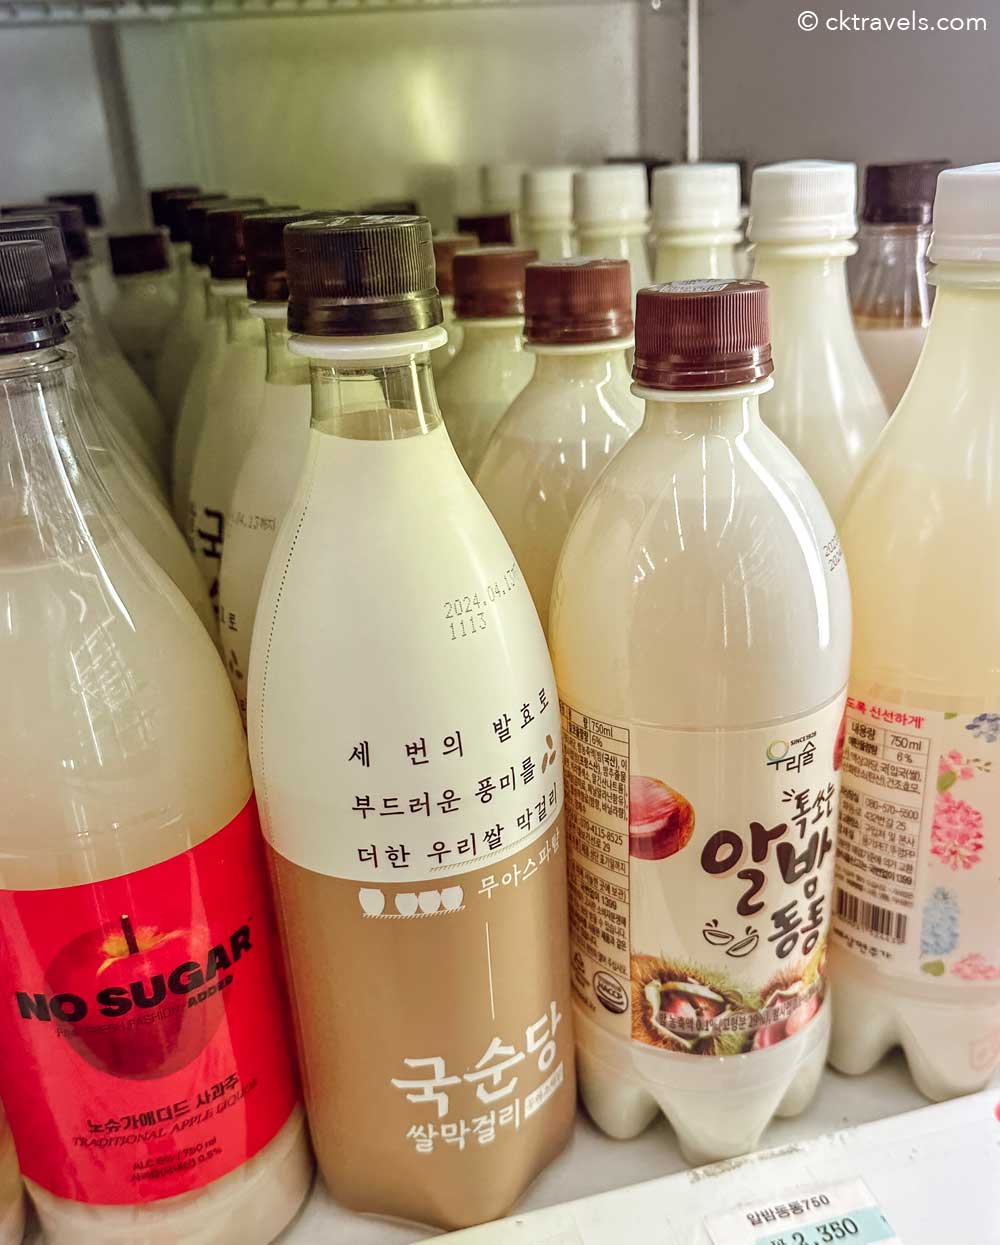 Rice Wine from CU convenience stores in South Korea